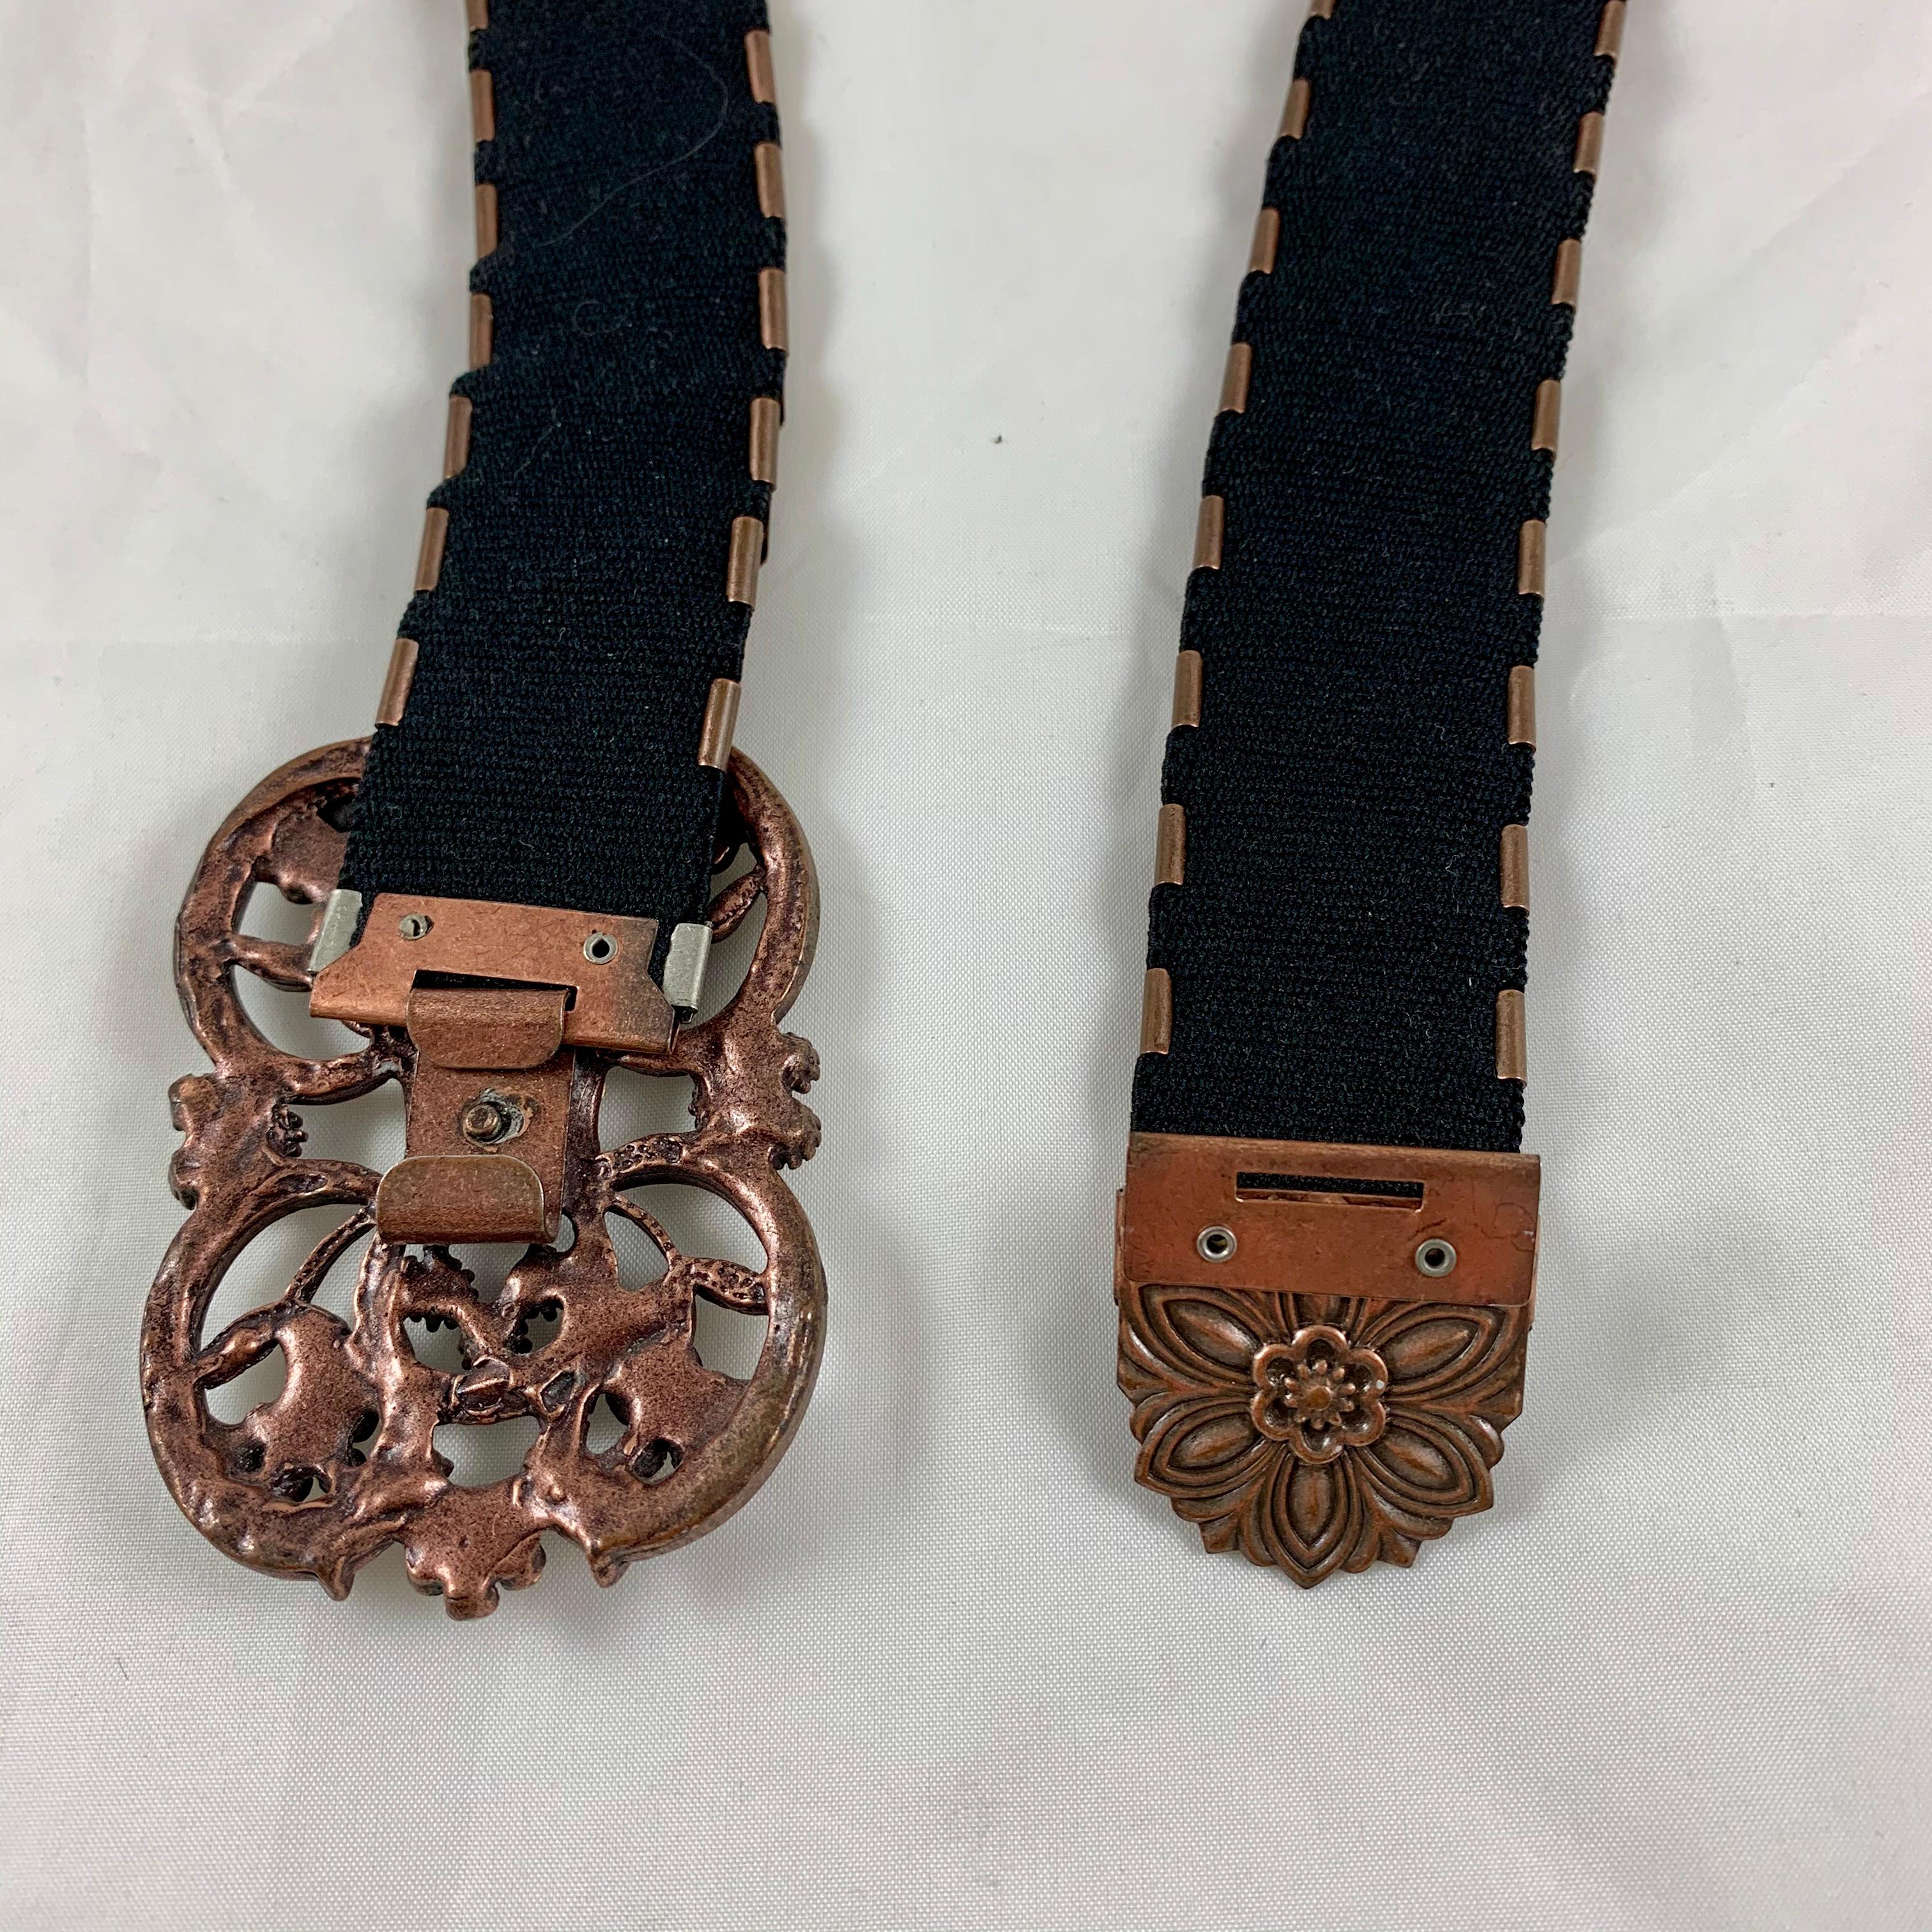 1970s Era Copper-Tone Snake Scale Metal and Crystal Jeweled Buckle Handmade Belt For Sale 7